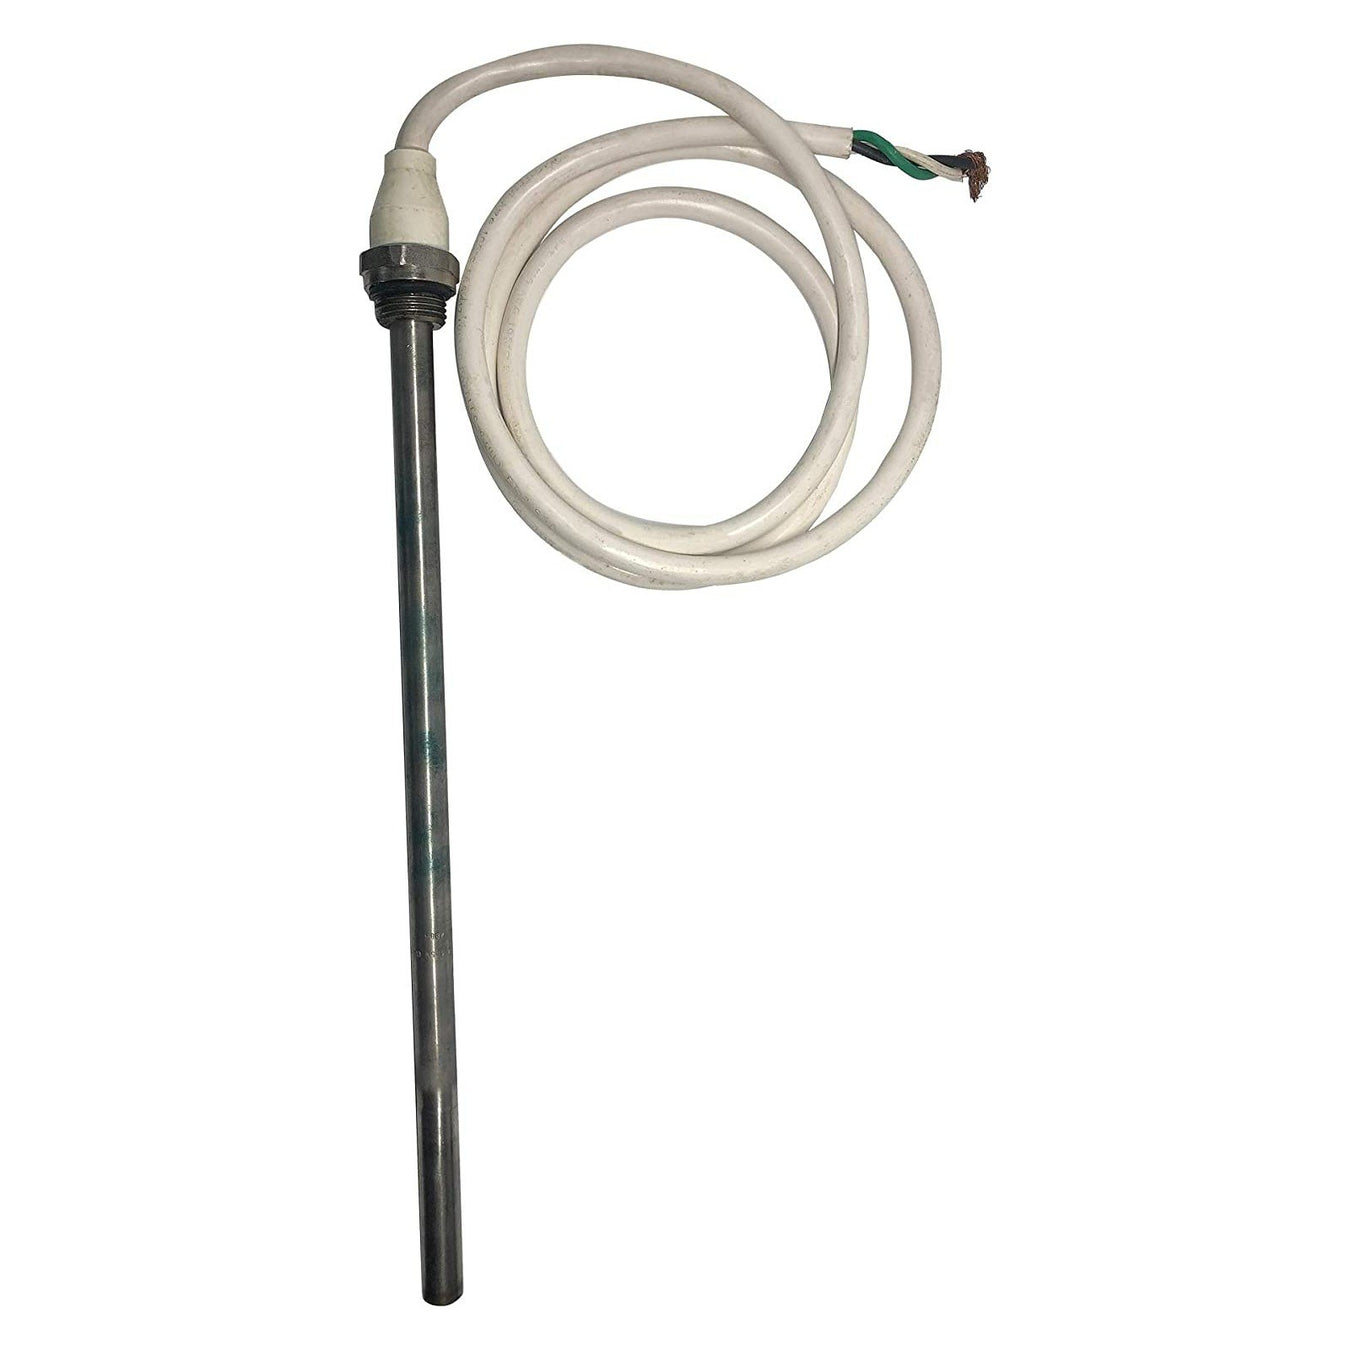 All Replacement Heating Elements